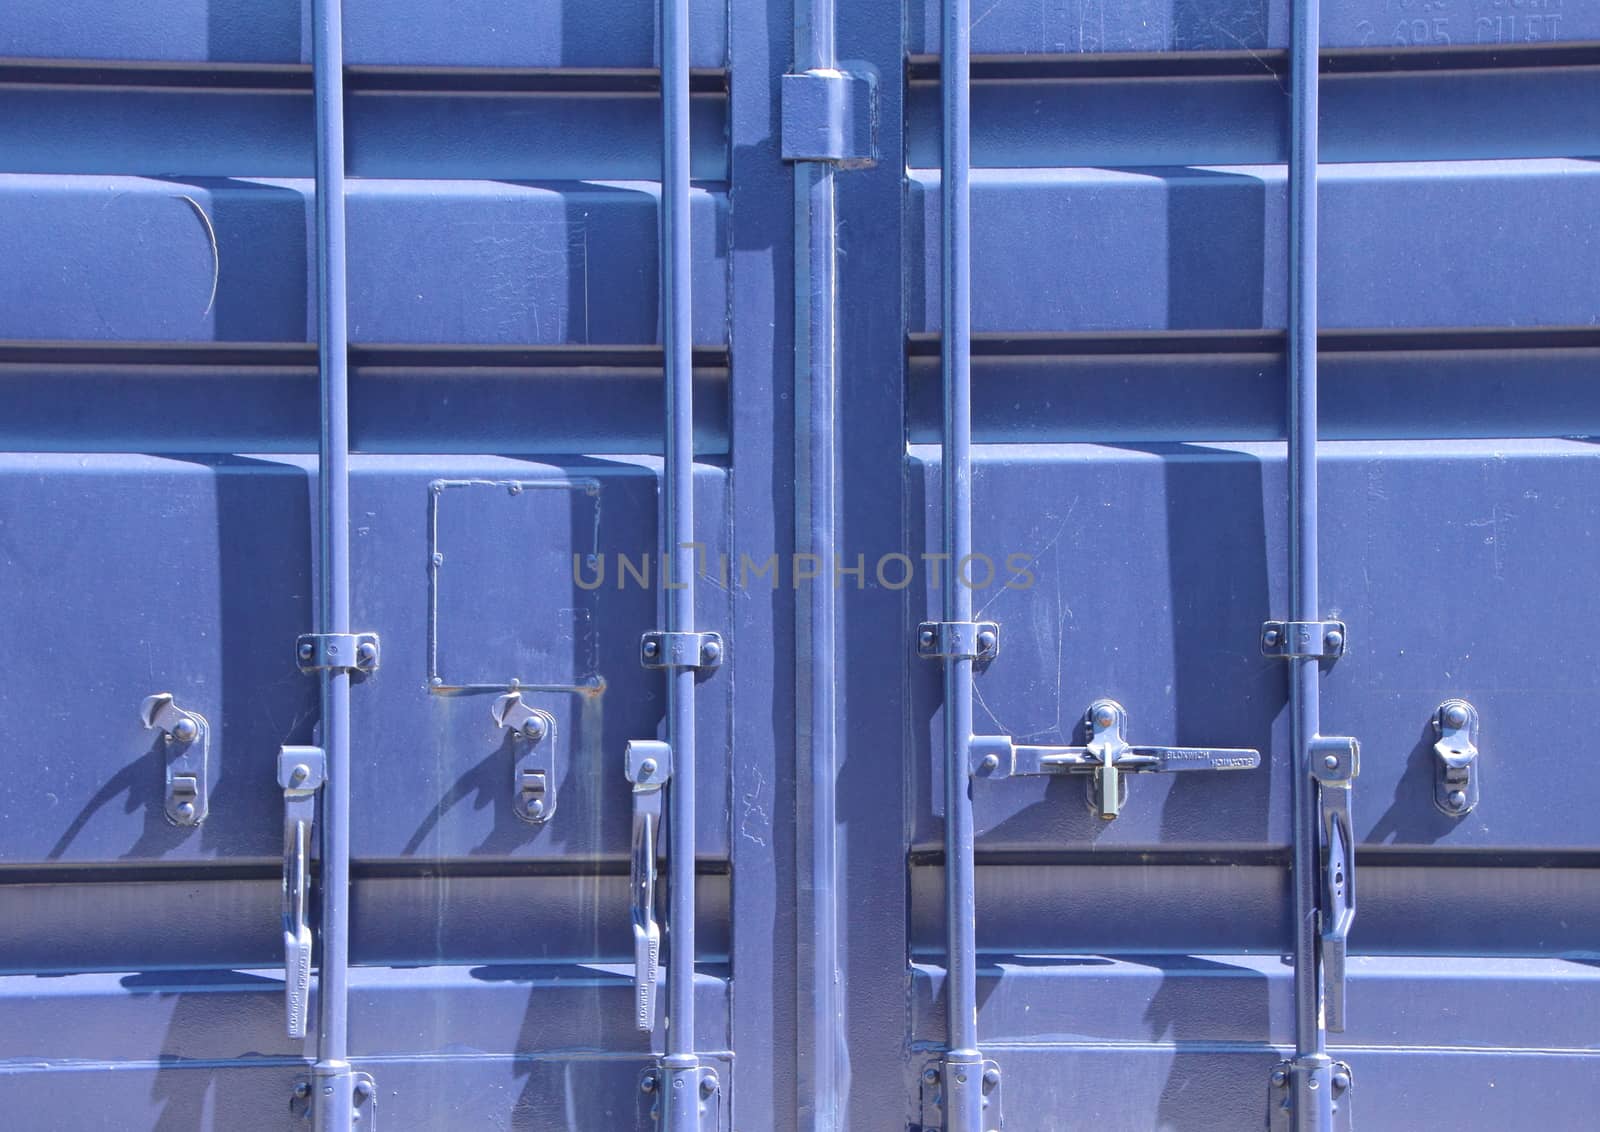 New Lock Mechanism on Blue Container Closeup by HoleInTheBox